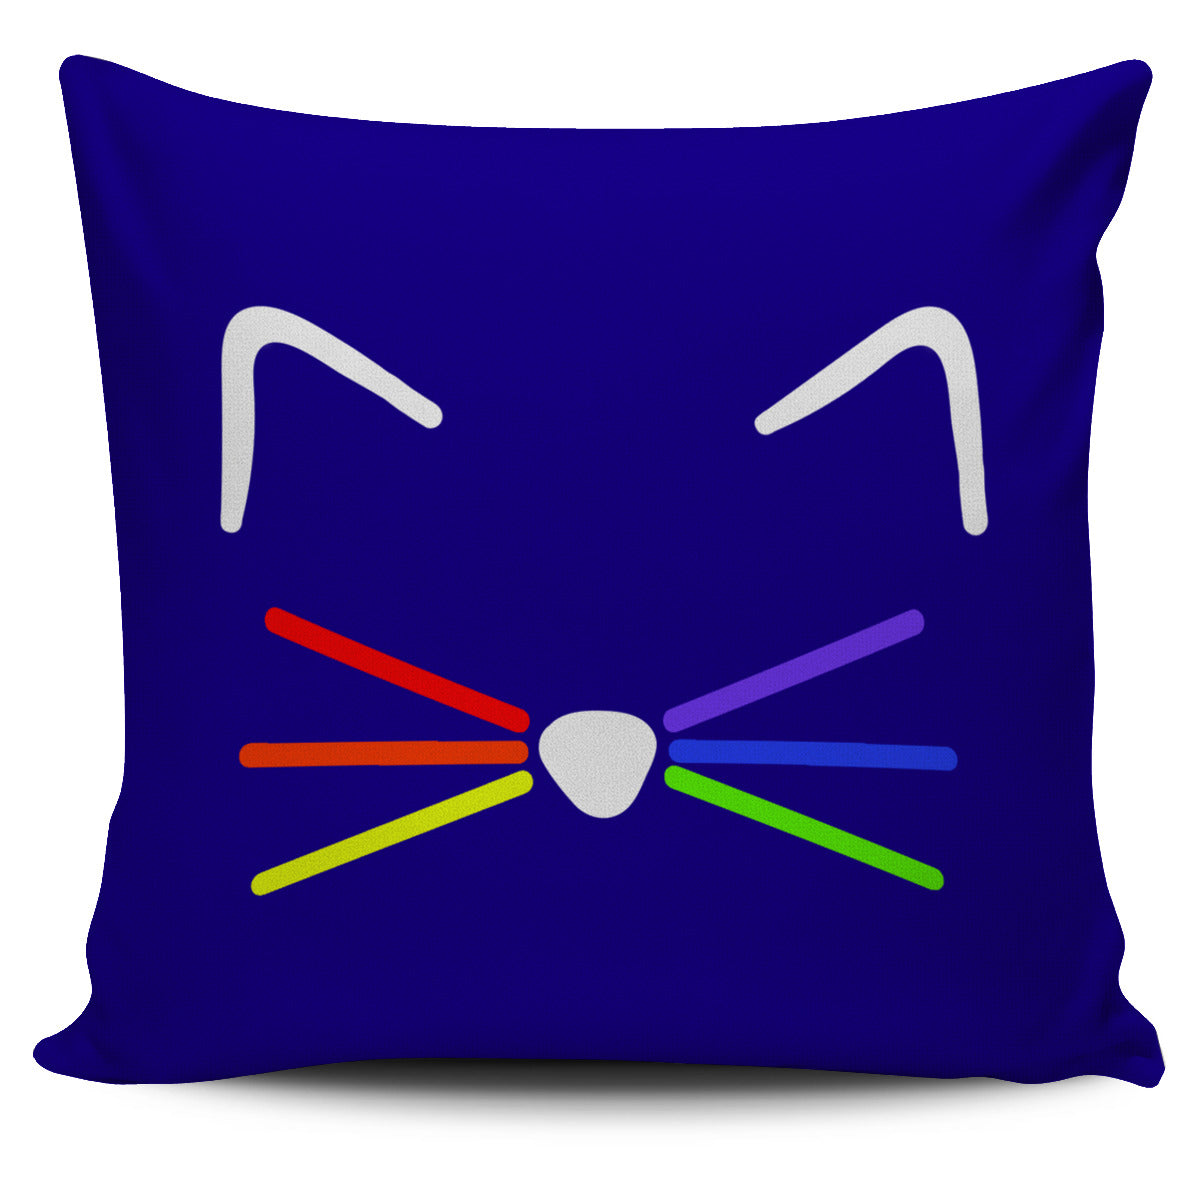 Purring With Pride Pillow Cover